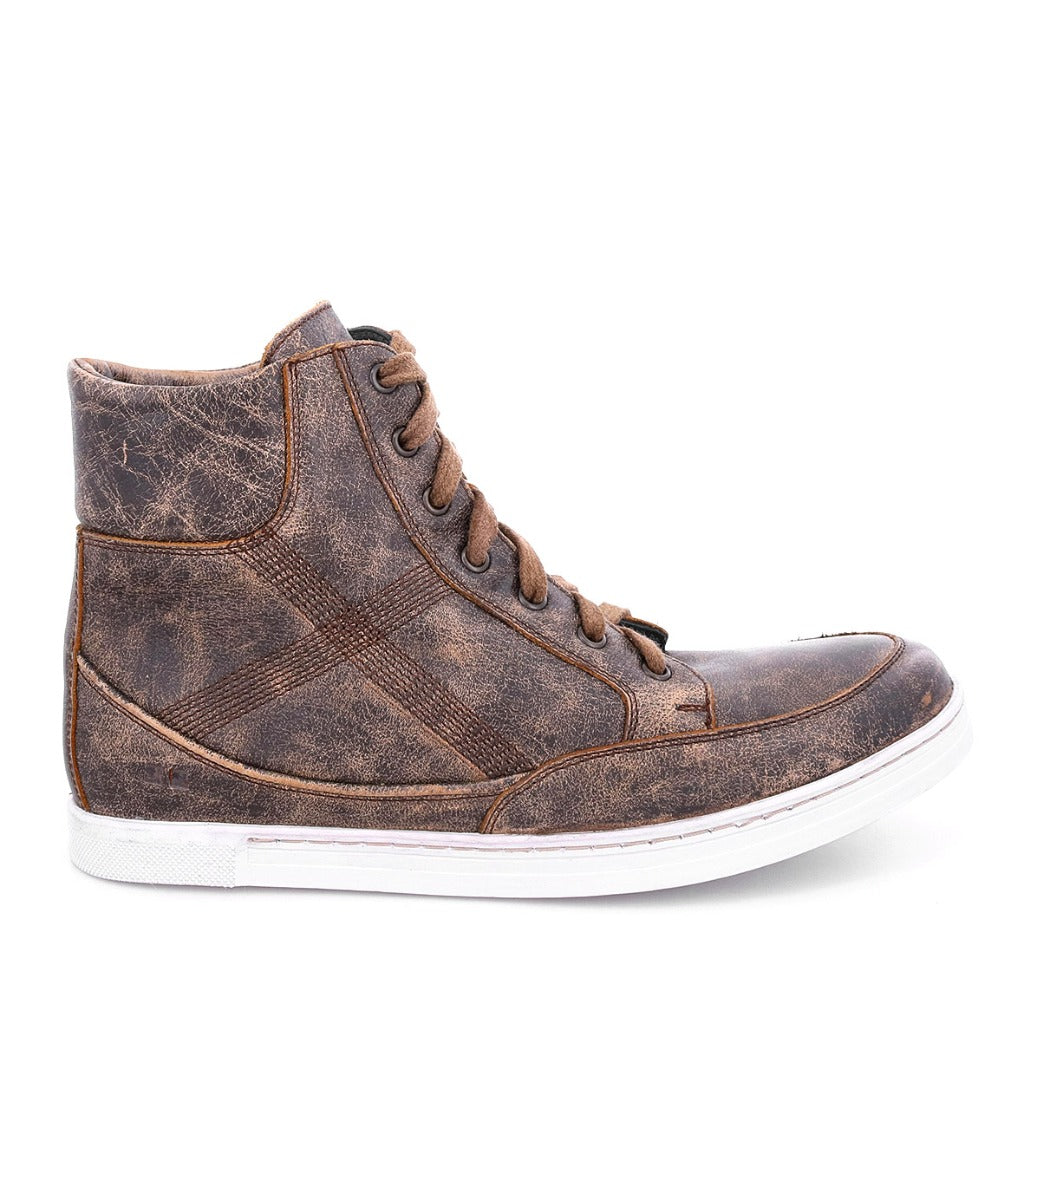 A Lordmind men's brown high top sneaker on a white background by Bed Stu.